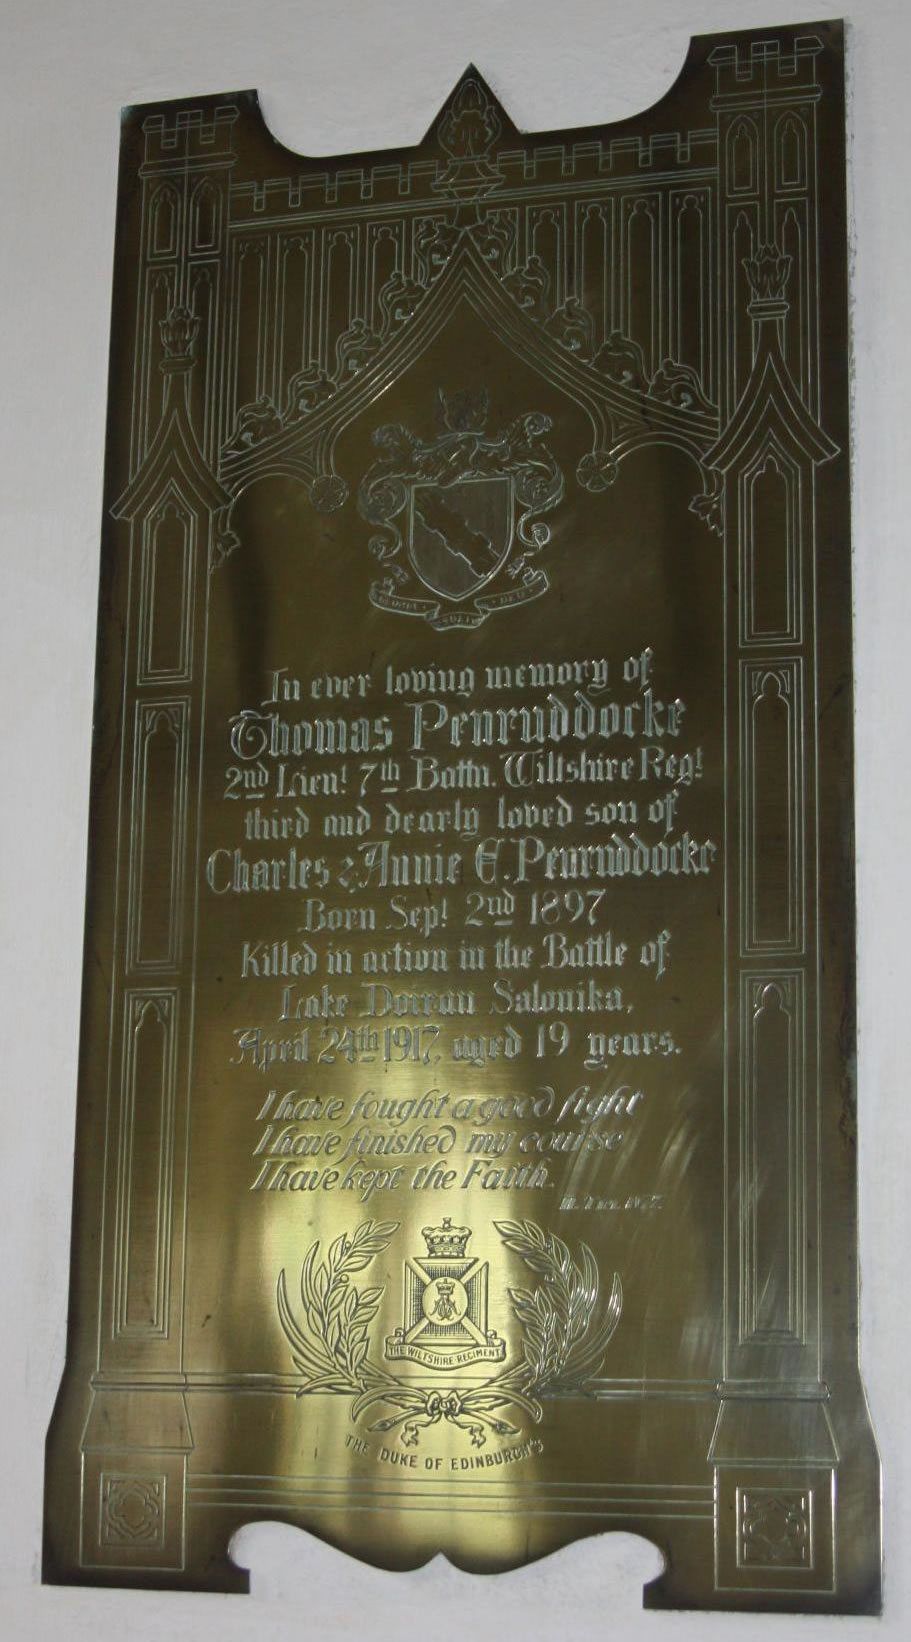 2nd Lt Thomas Penruddocke commemorated inside the church would have been buried near where he fell in Salonica